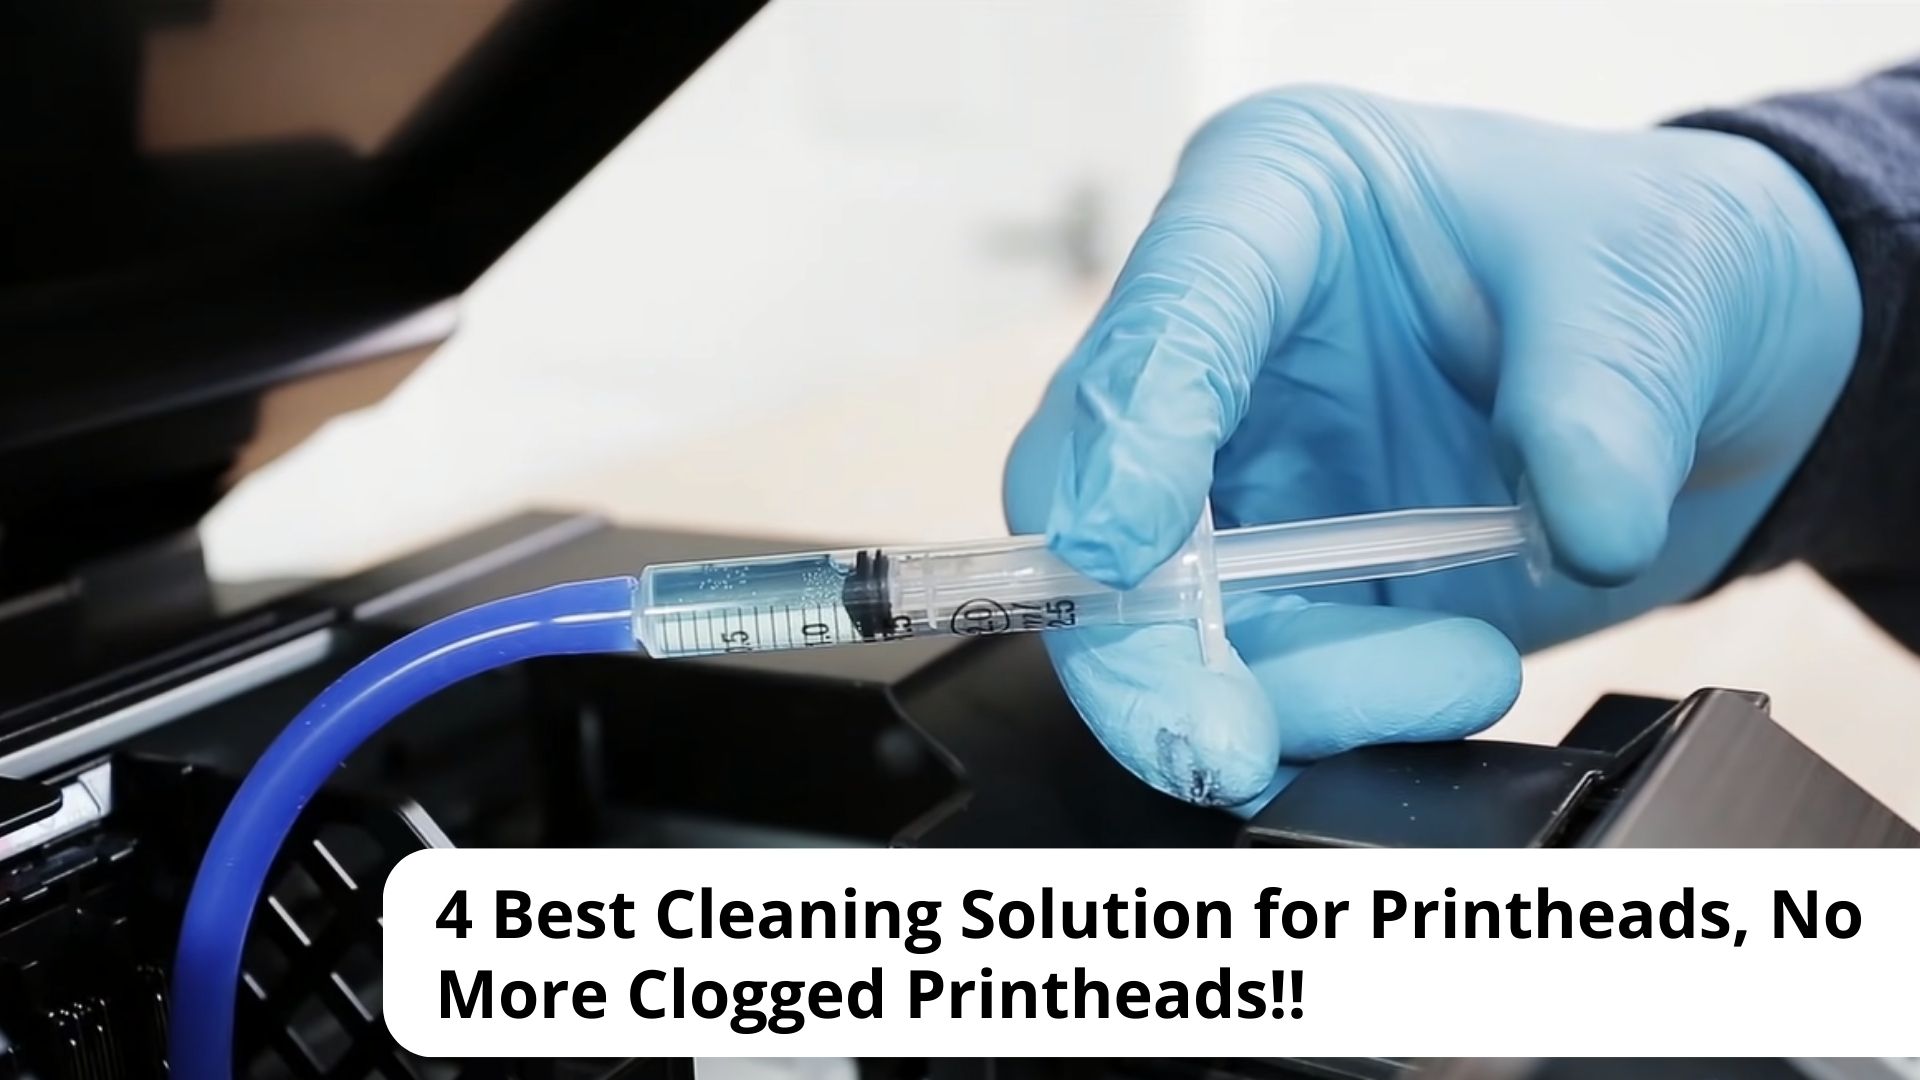 Best Cleaning Solution for Printheads